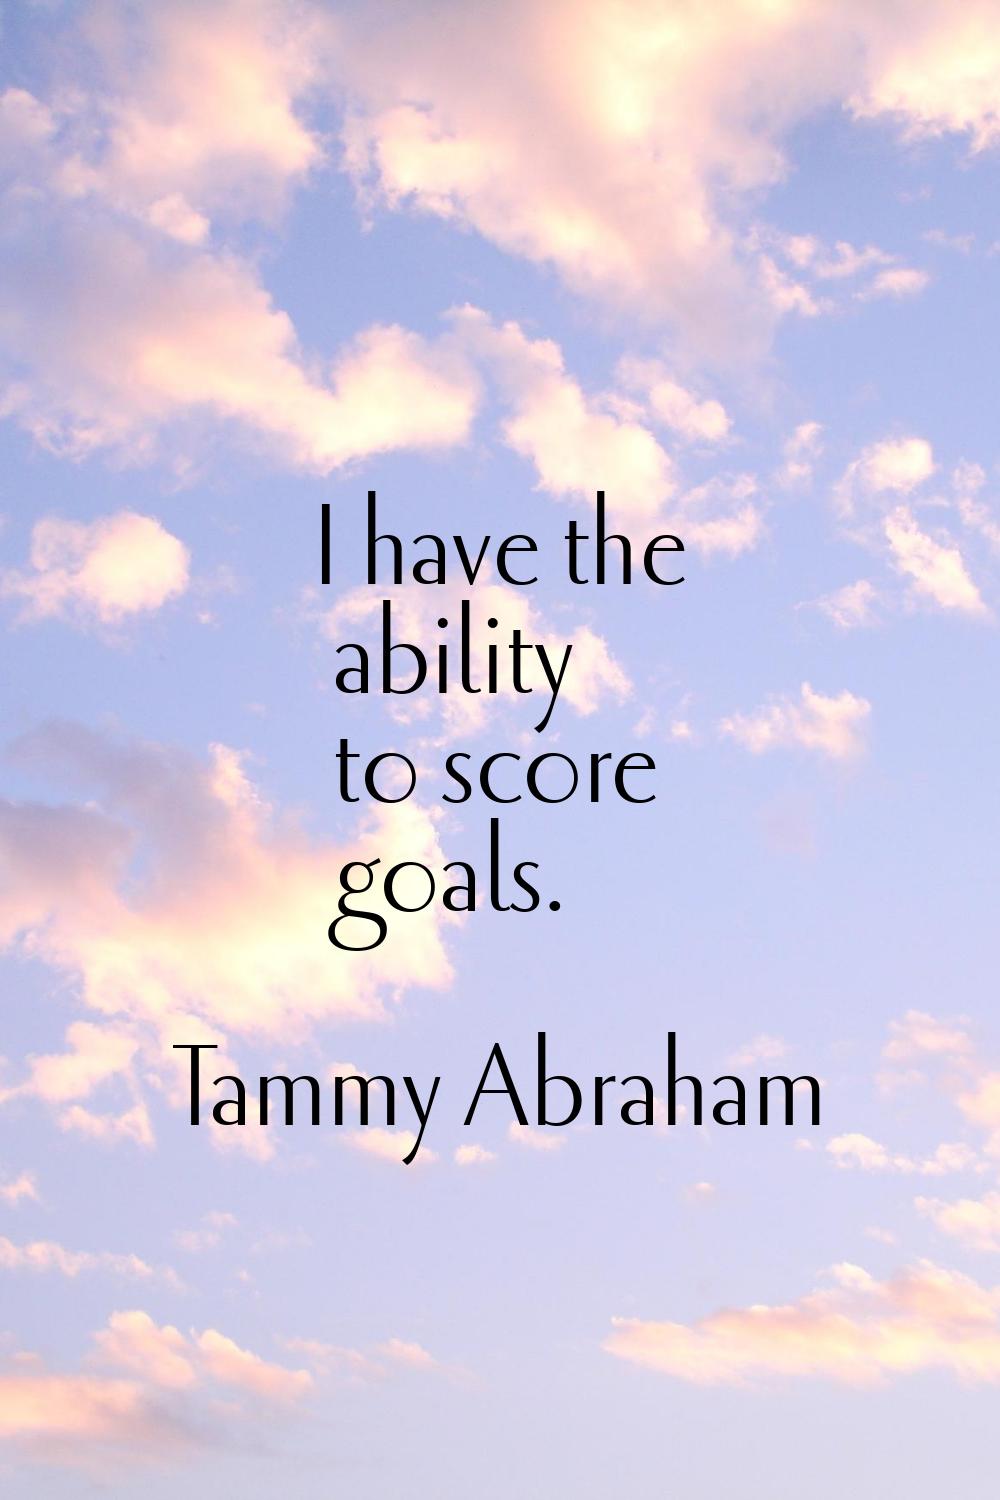 I have the ability to score goals.